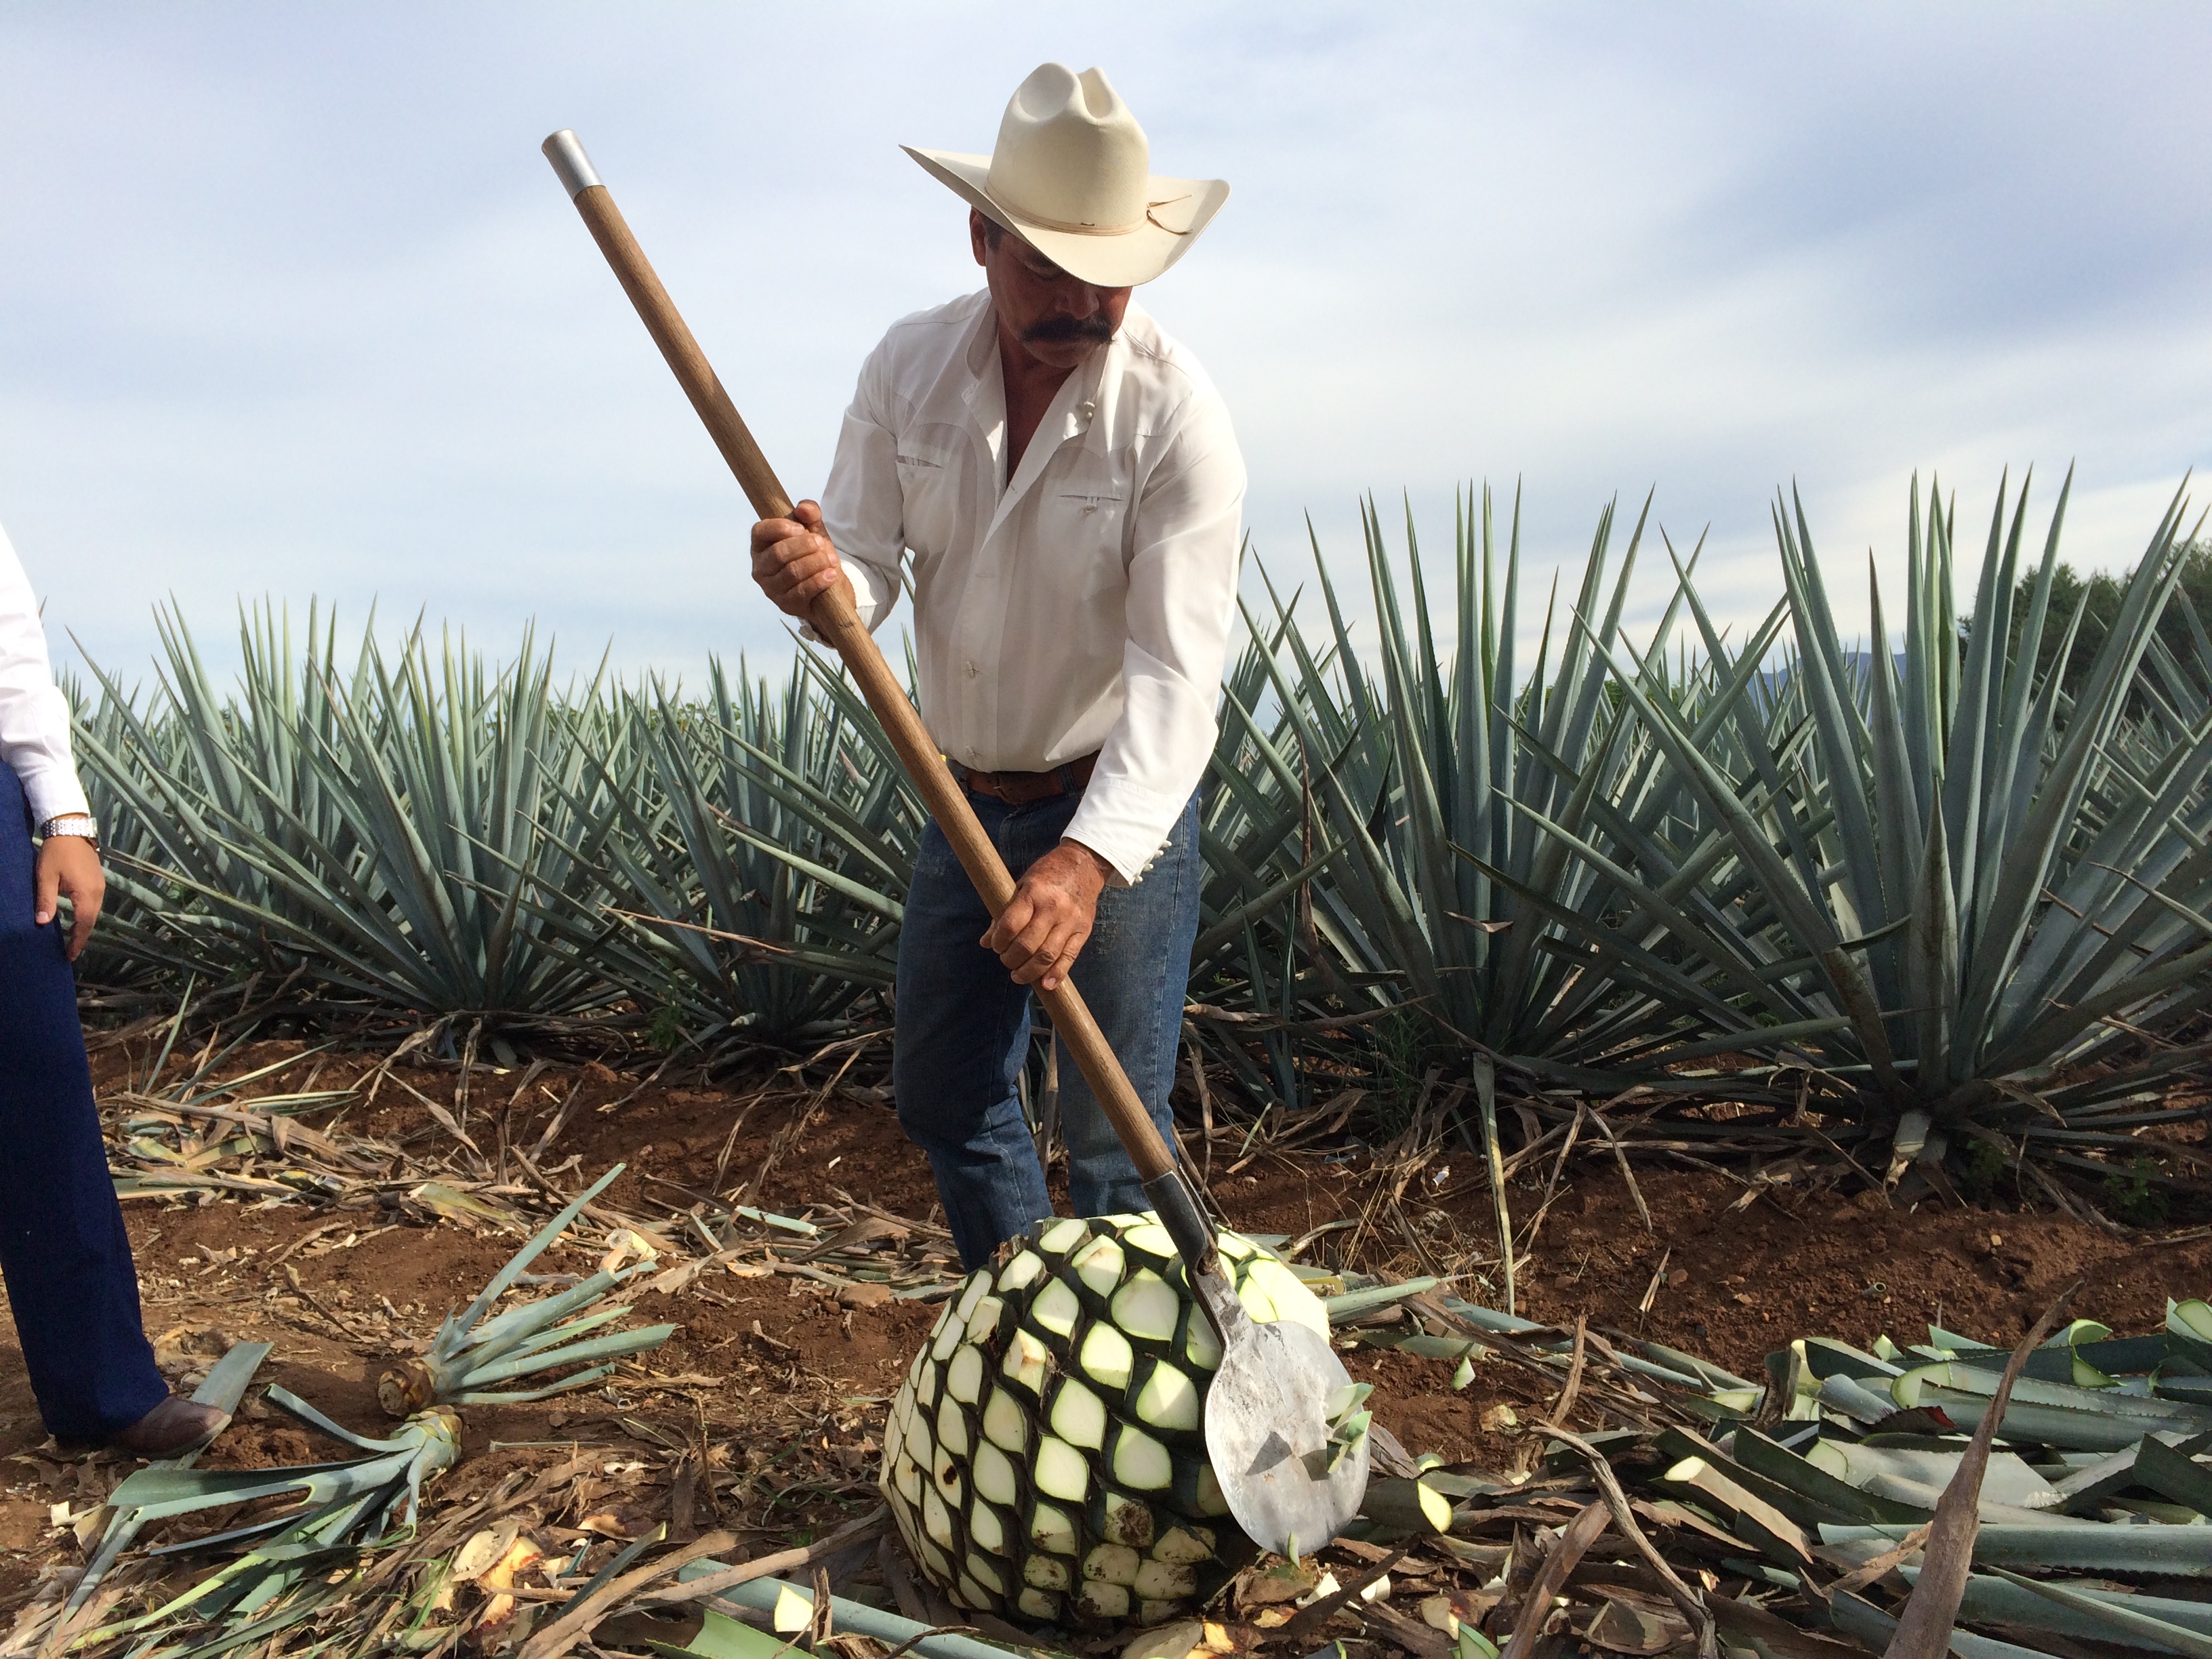 Harvesting the agave cactus for tequila. Photo: Tonya Fitzpatrick